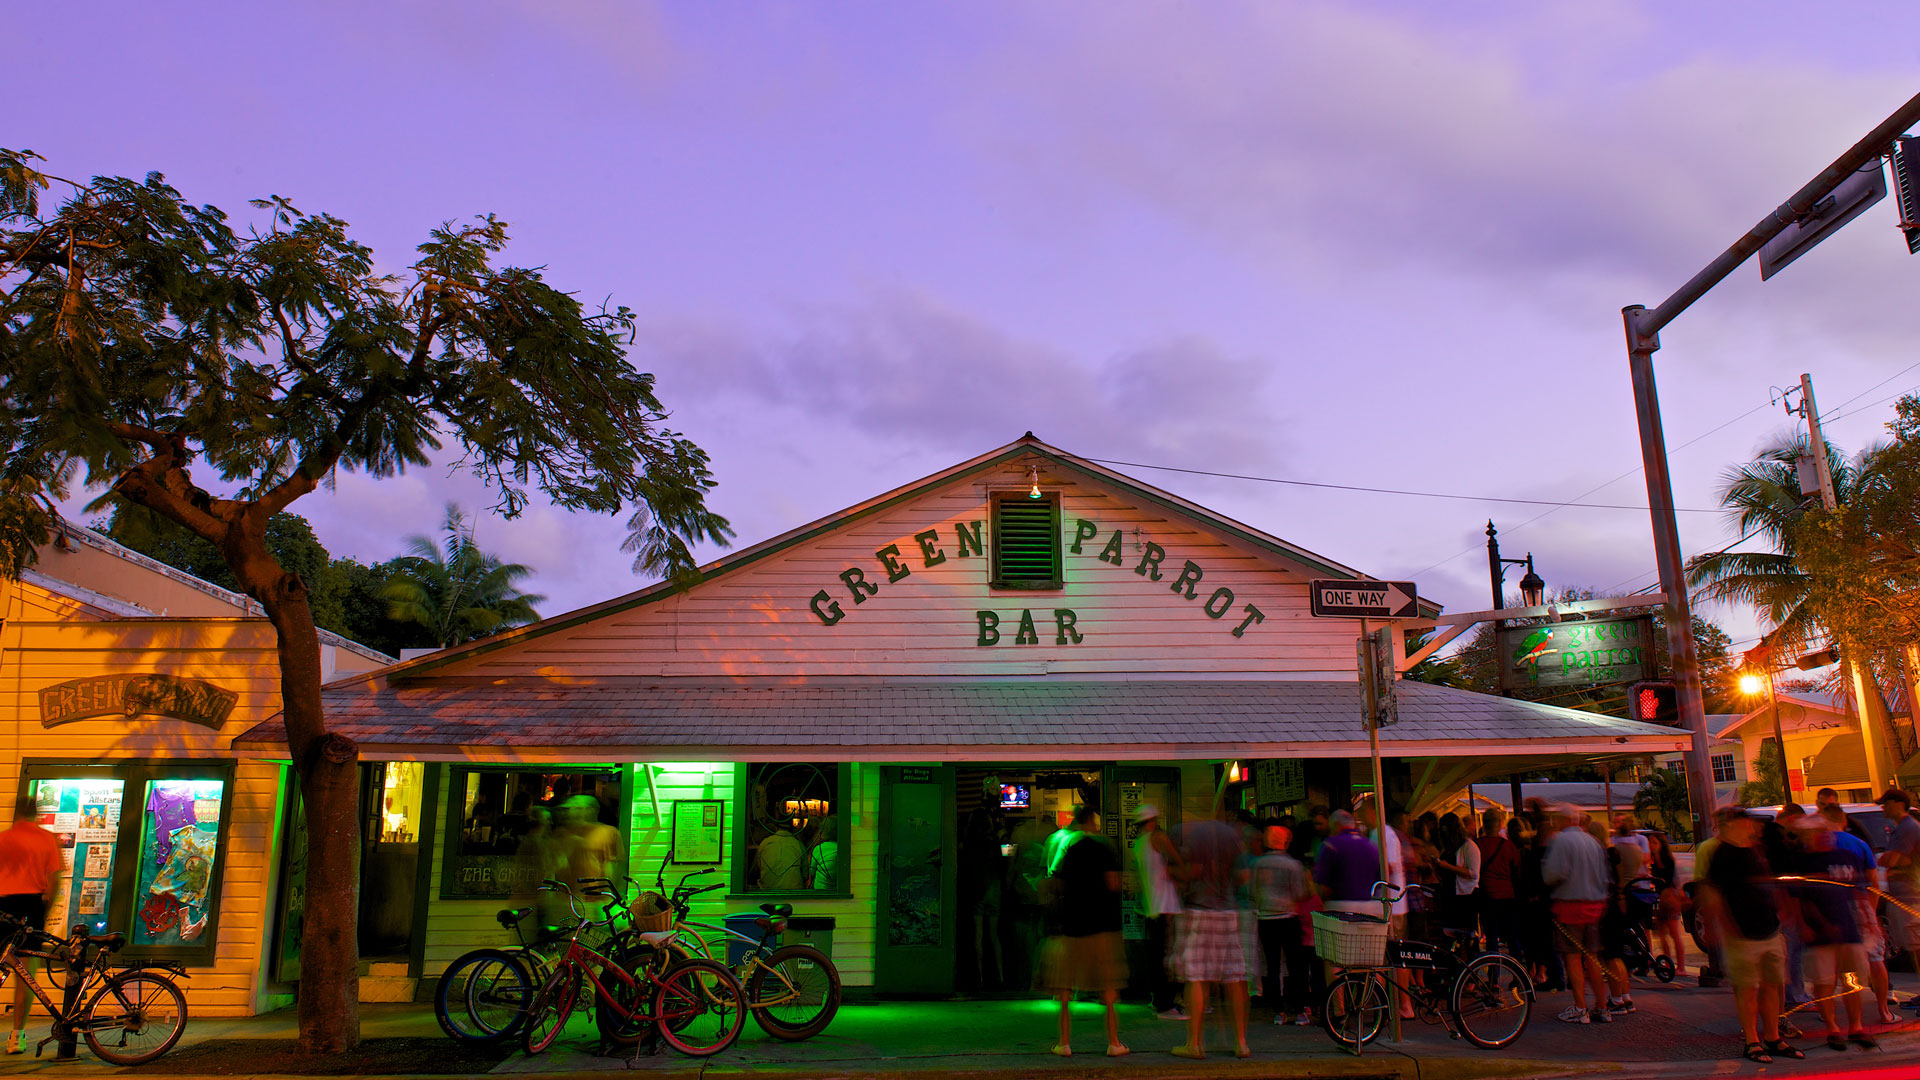 A must-visit location as a Key West local: the Green Parrot Bar